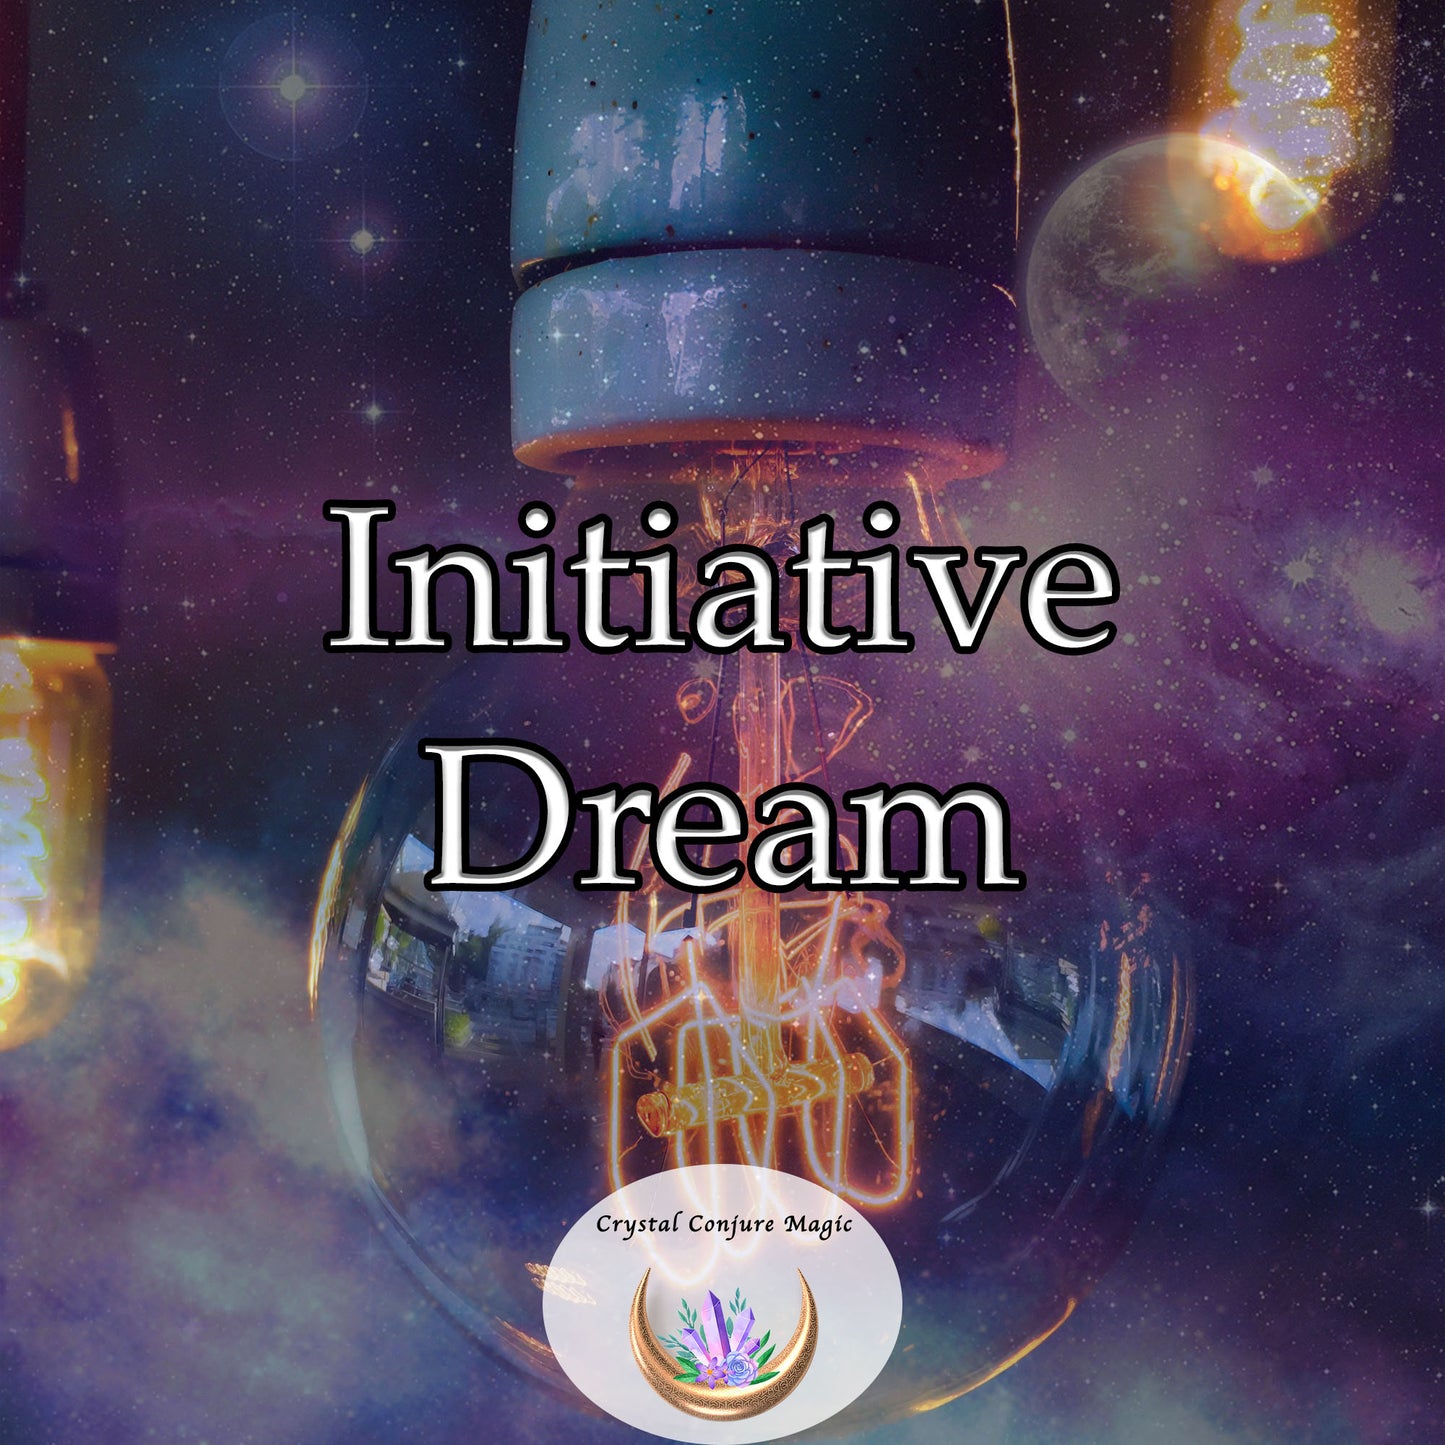 Initiative Dream - tap into the well of your inner motivation, igniting a flame of determination